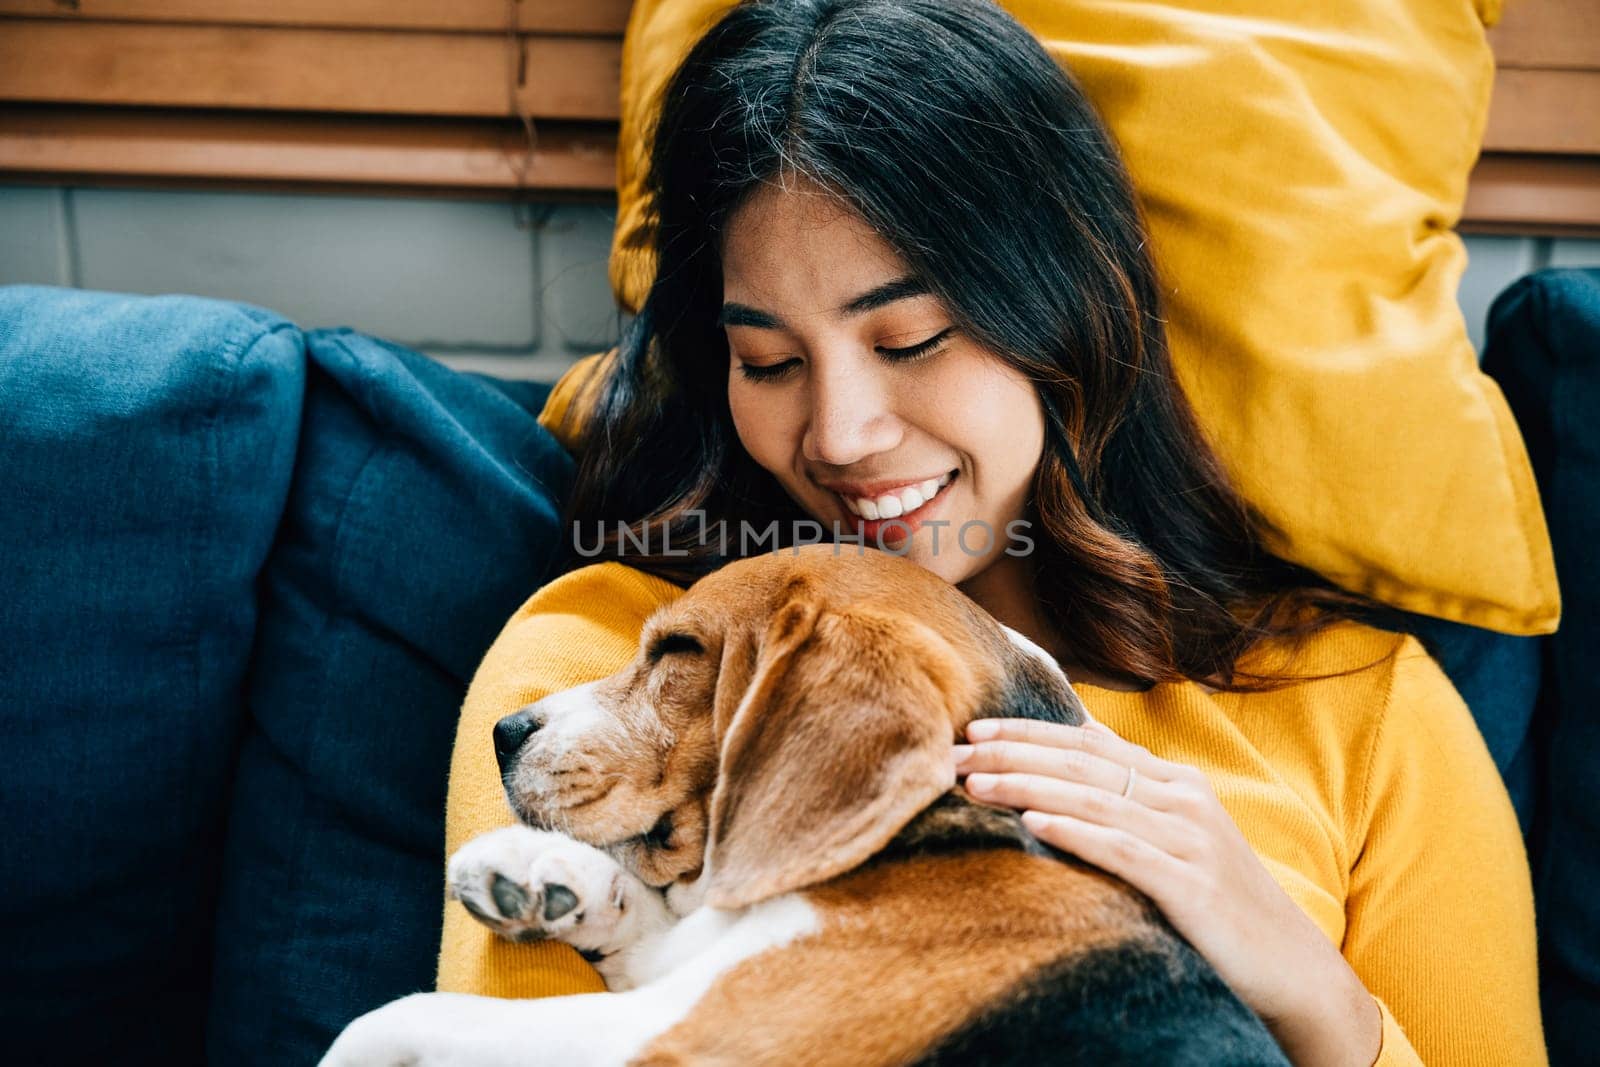 Embracing the concept of trust and love, a woman and her Beagle dog sleep together on the sofa in the living room. Their bond reflects the joy of being best friends forever. Pet love